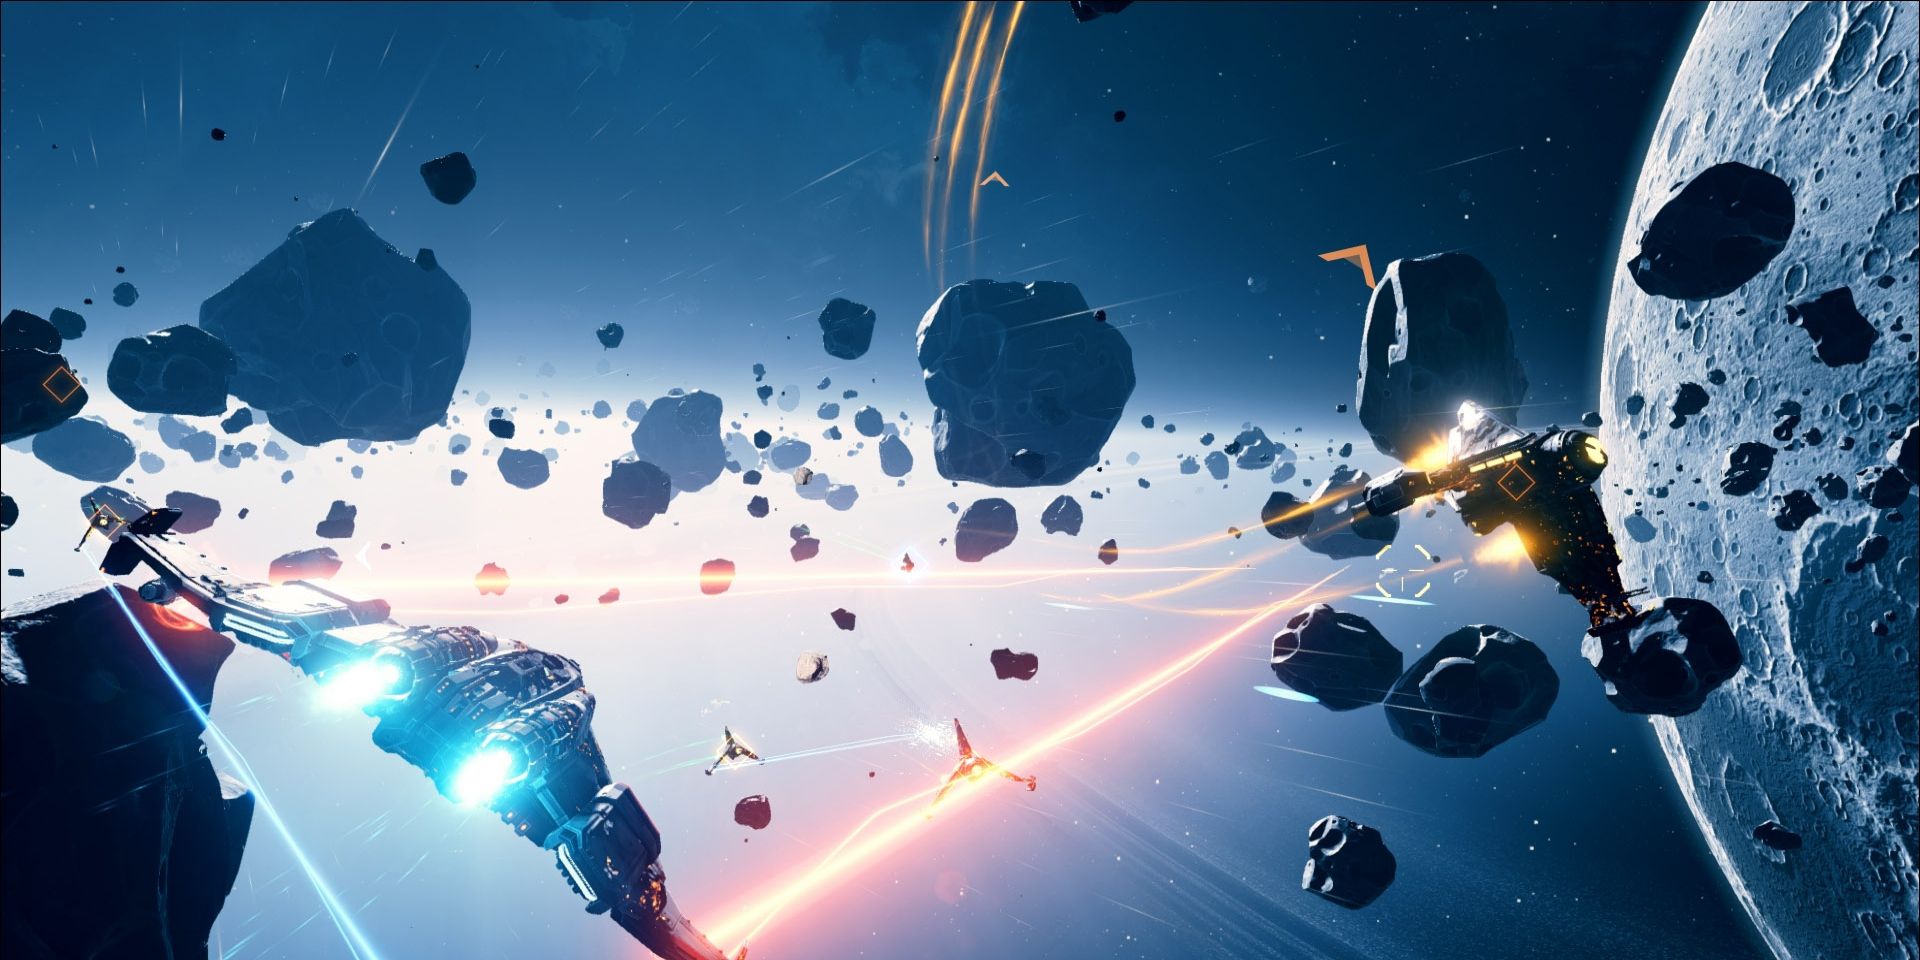 A screenshot from the roguelike video game Everspace.